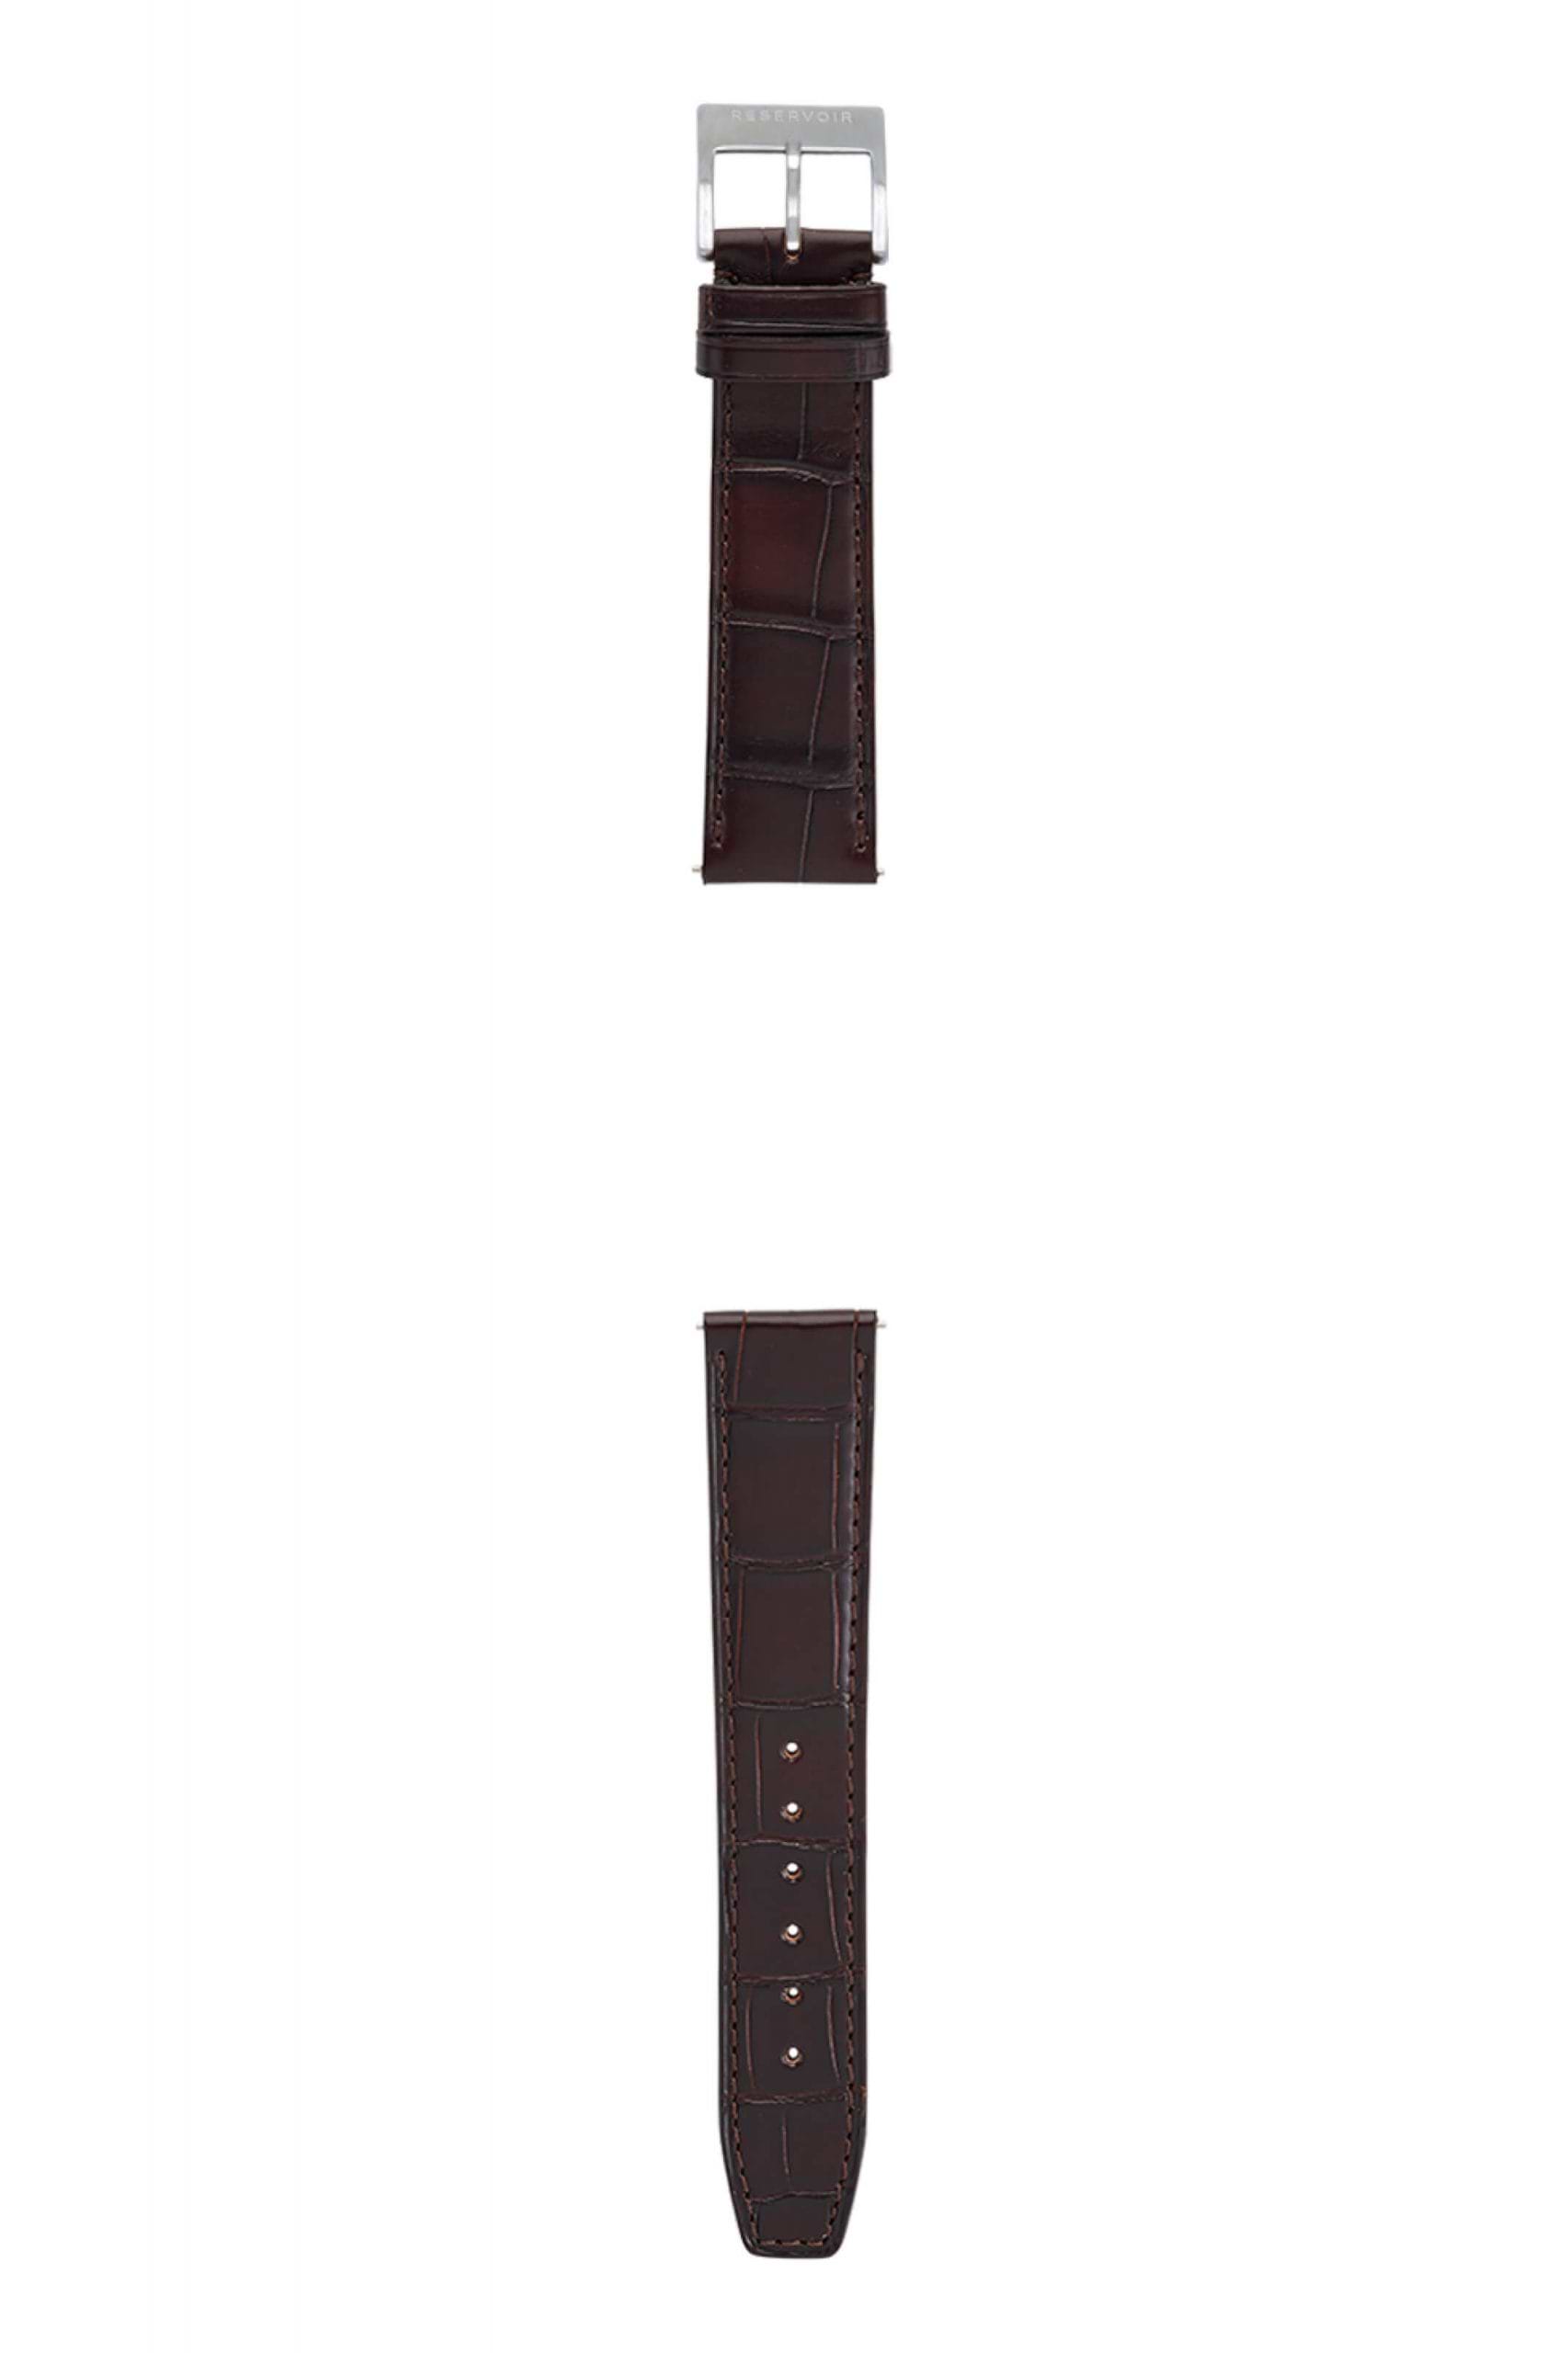 Brown watch strap with a metal buckle and multiple adjustment holes, featuring edge stitching.